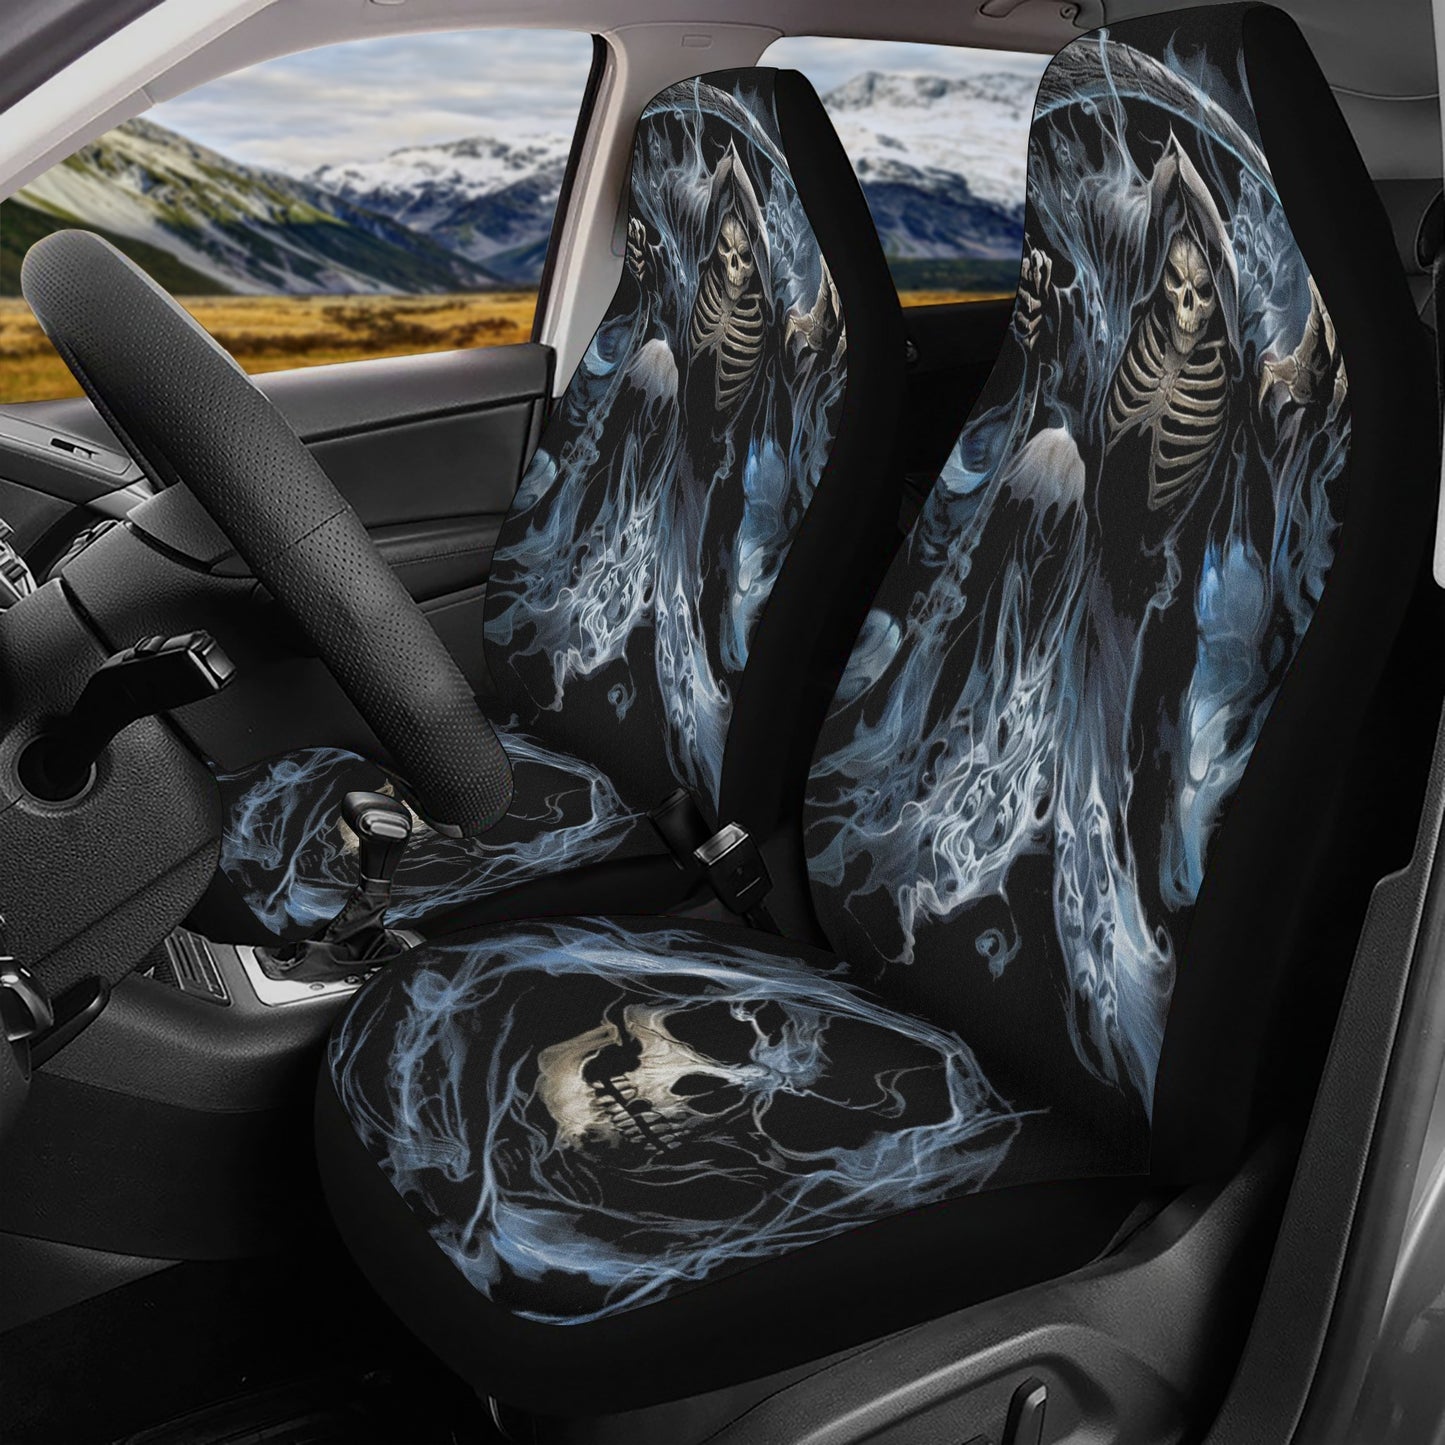 Horror car accessories, skull seat cover protector, floral skull seat cover for car, skull seat cover protector, goth car tool, punisher sku